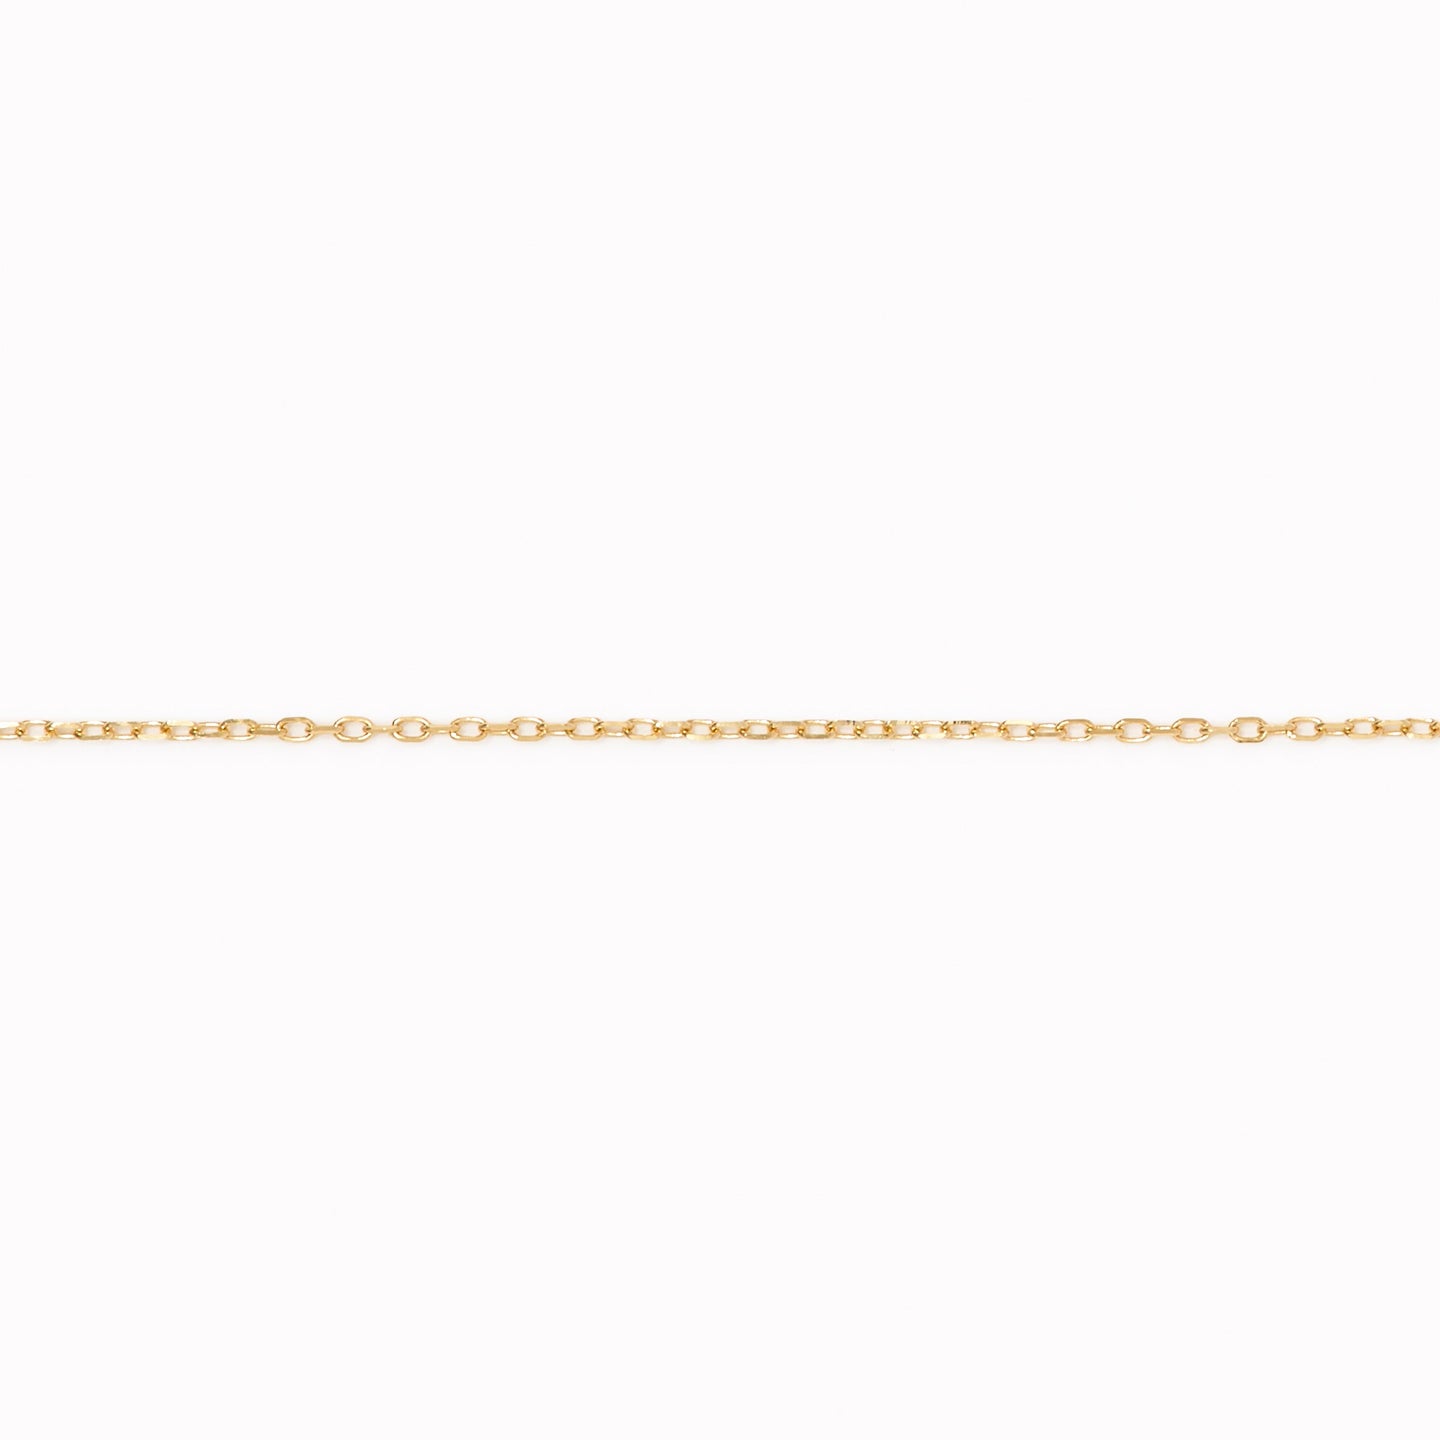 14k Gold Cable Chain Necklace (16 inches) - Tyra